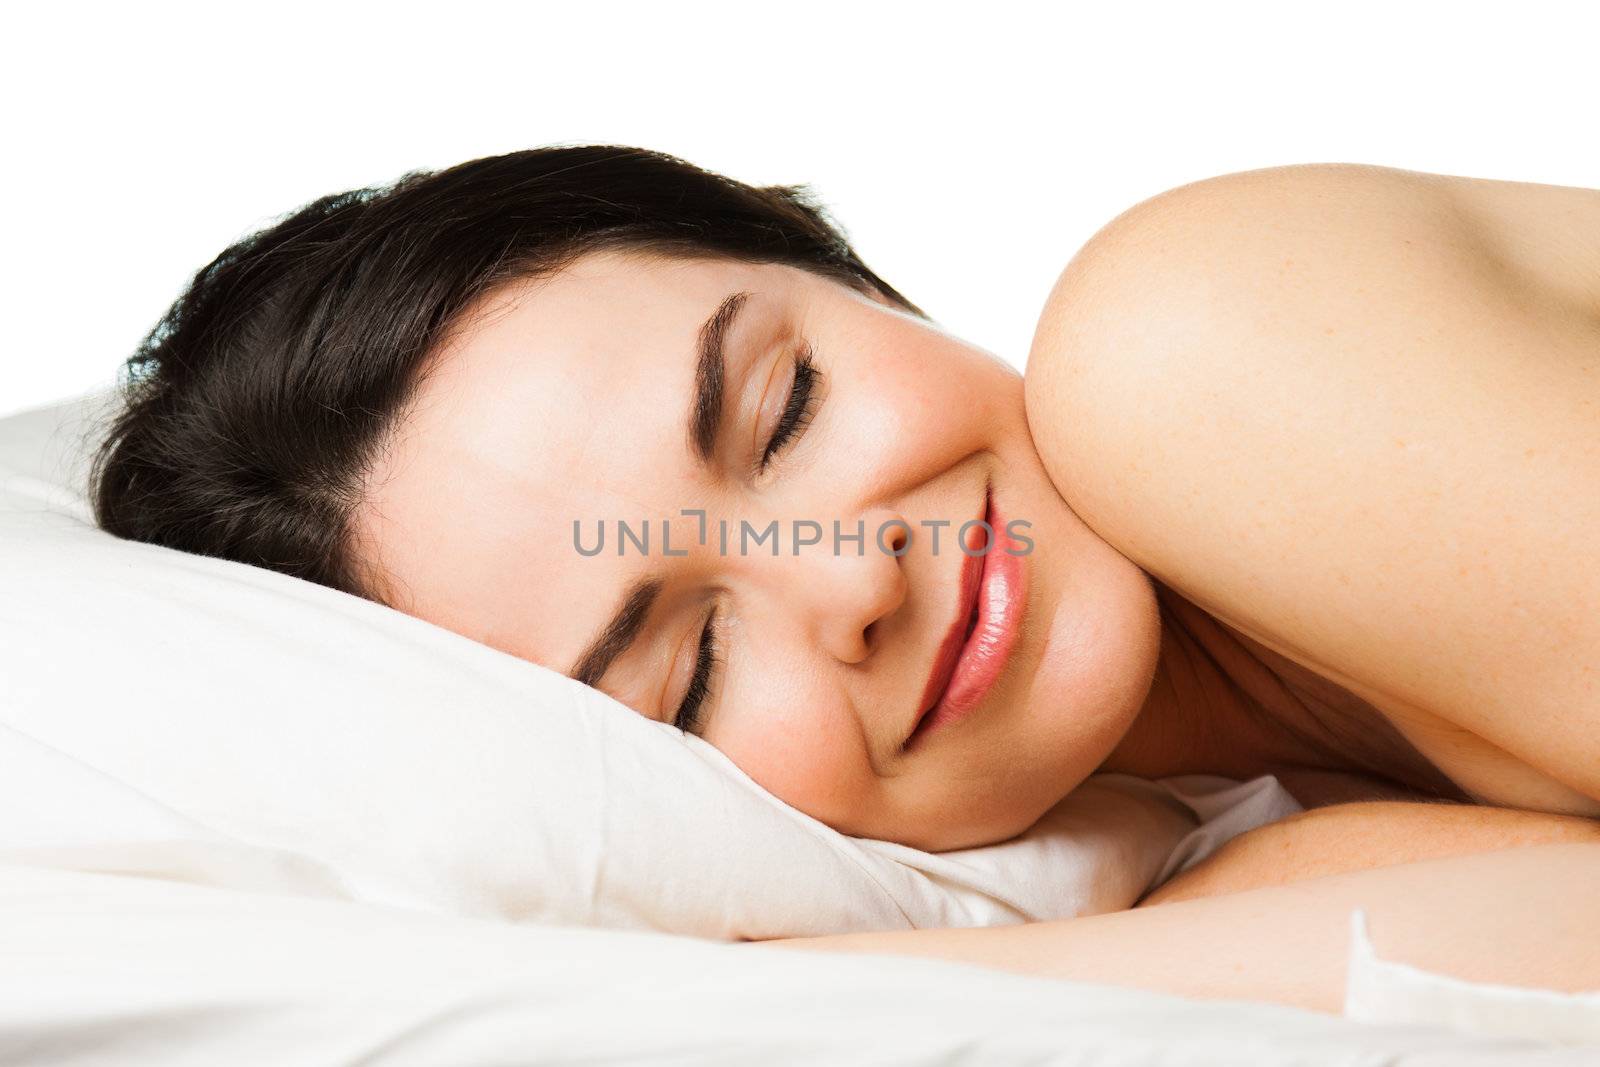 Portrait of a beautiful young woman sleeping peacefully. Isolated over white.